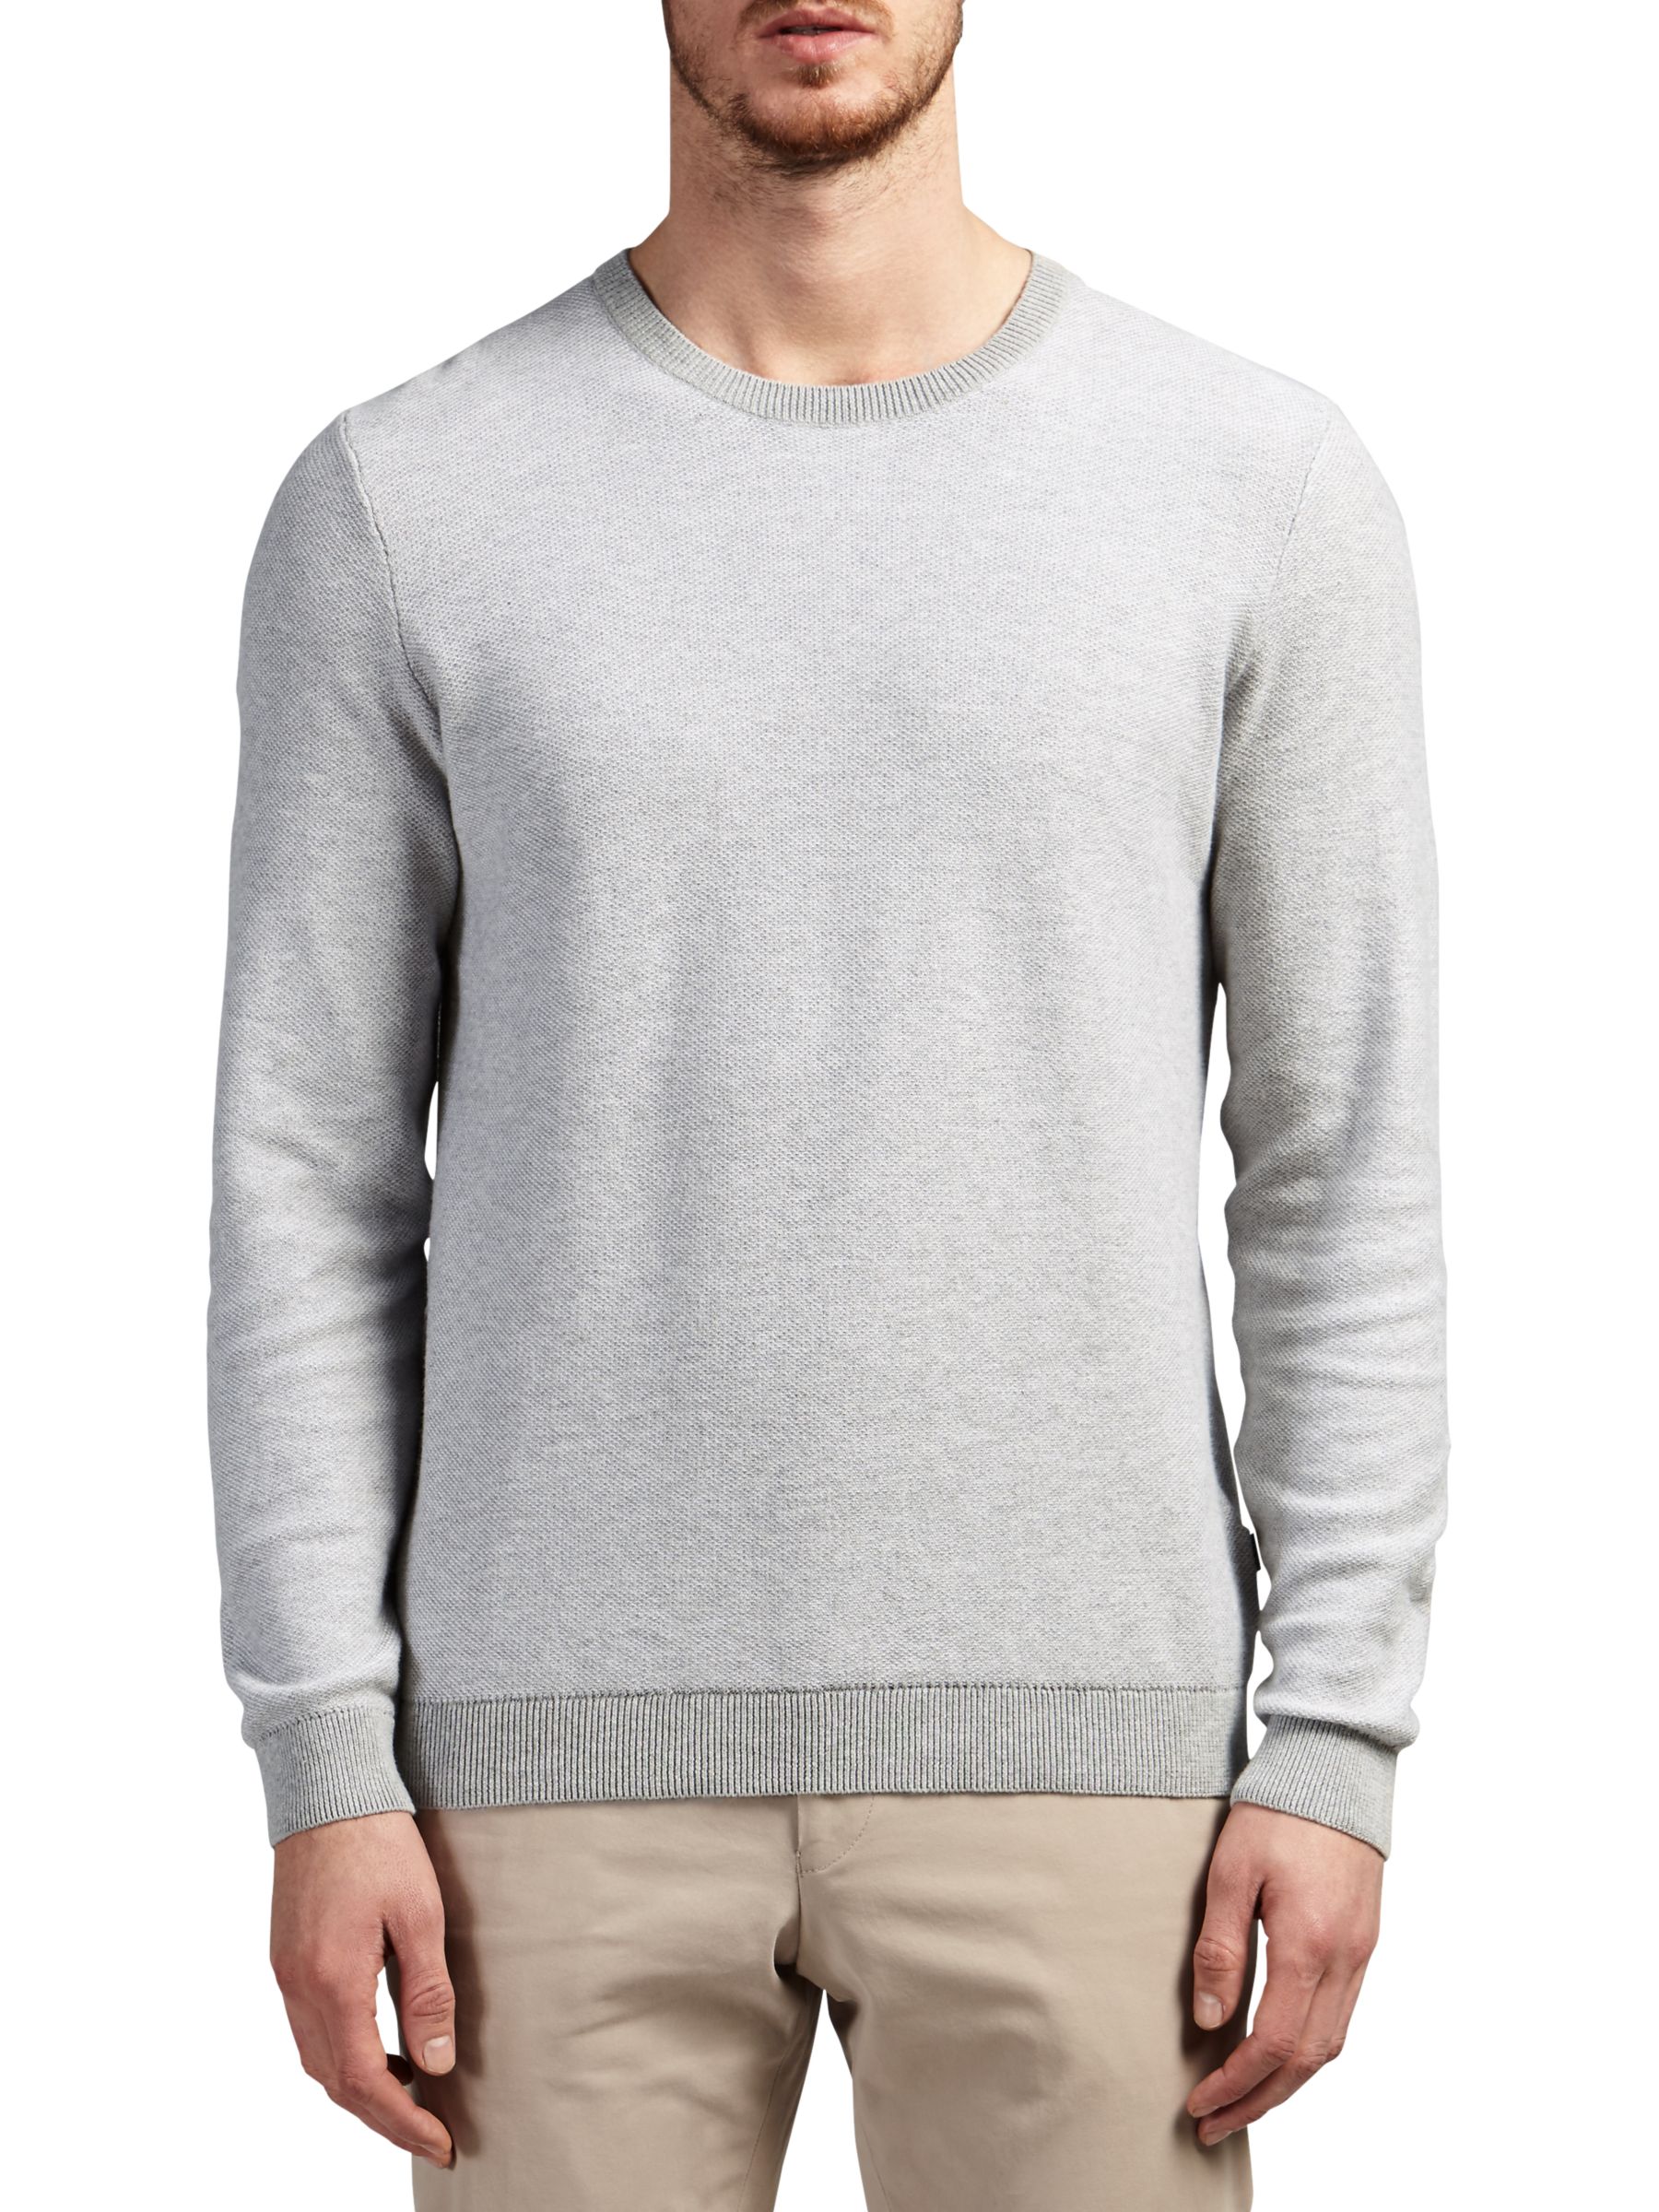 HUGO by Hugo Boss Sarmon Finely Patterned Jumper, Open Grey, S